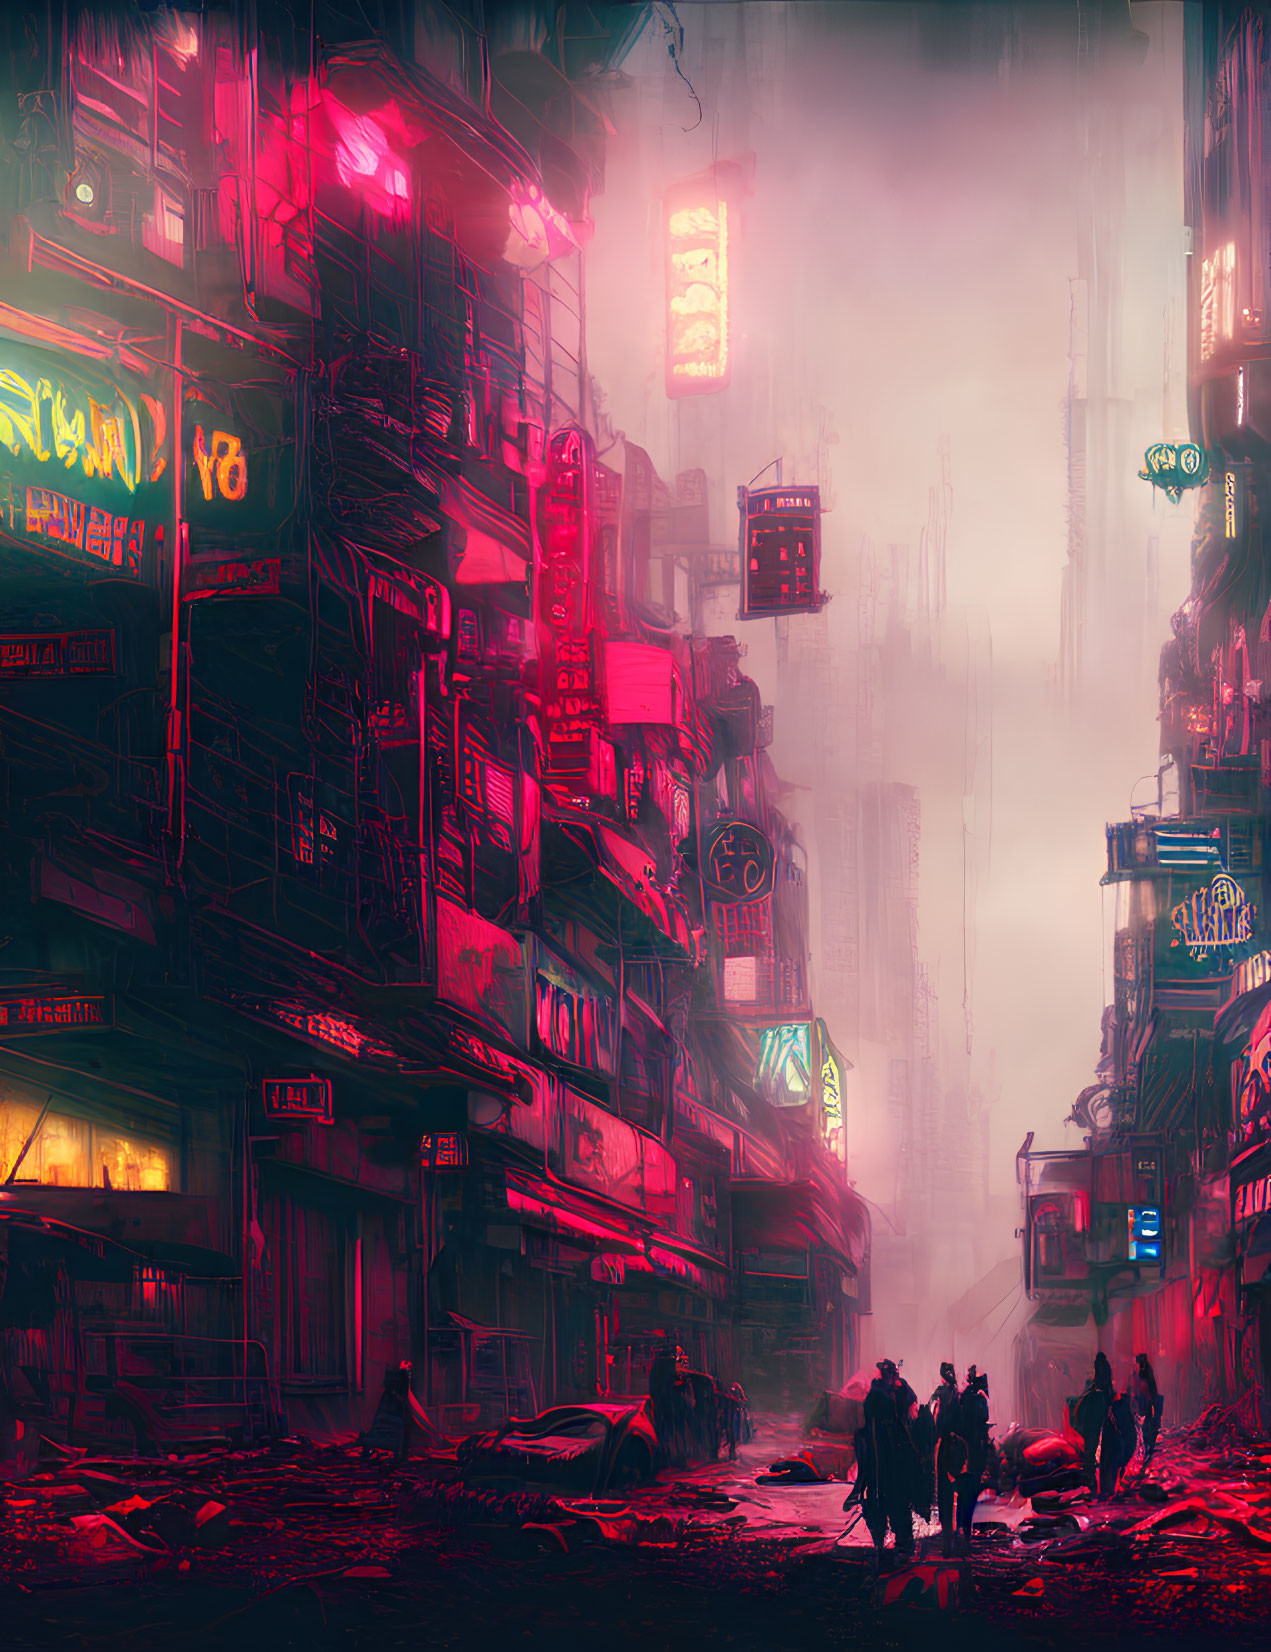 Silhouetted figures in neon-lit dystopian alley with futuristic signboards